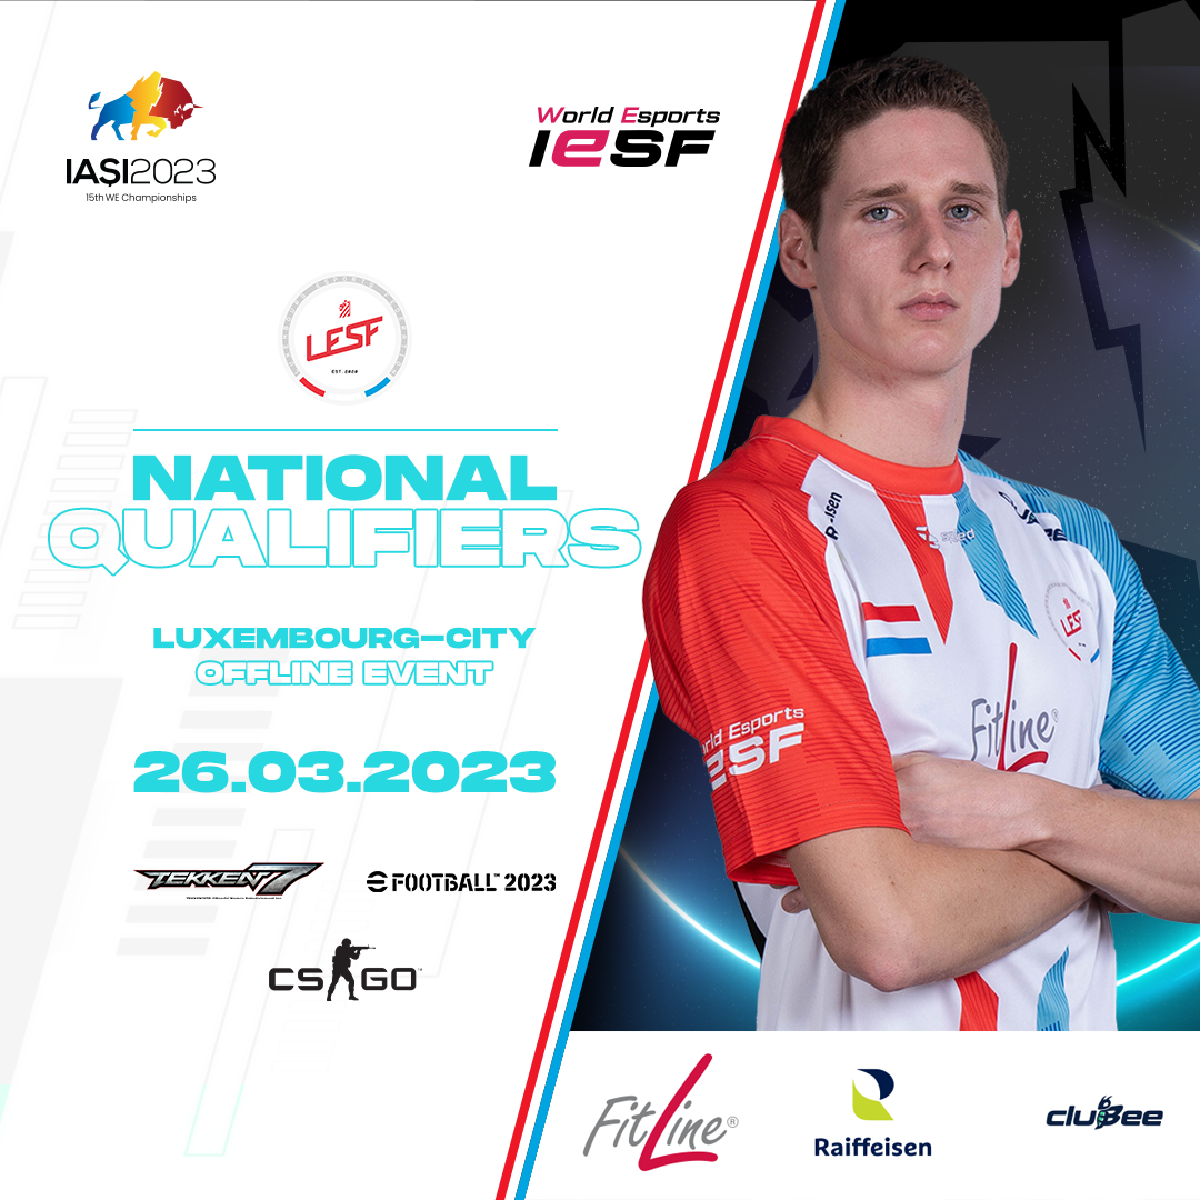 NATIONAL QUALIFIERS FOR THE WORLD ESPORTS CHAMPIONSHIPS 2023